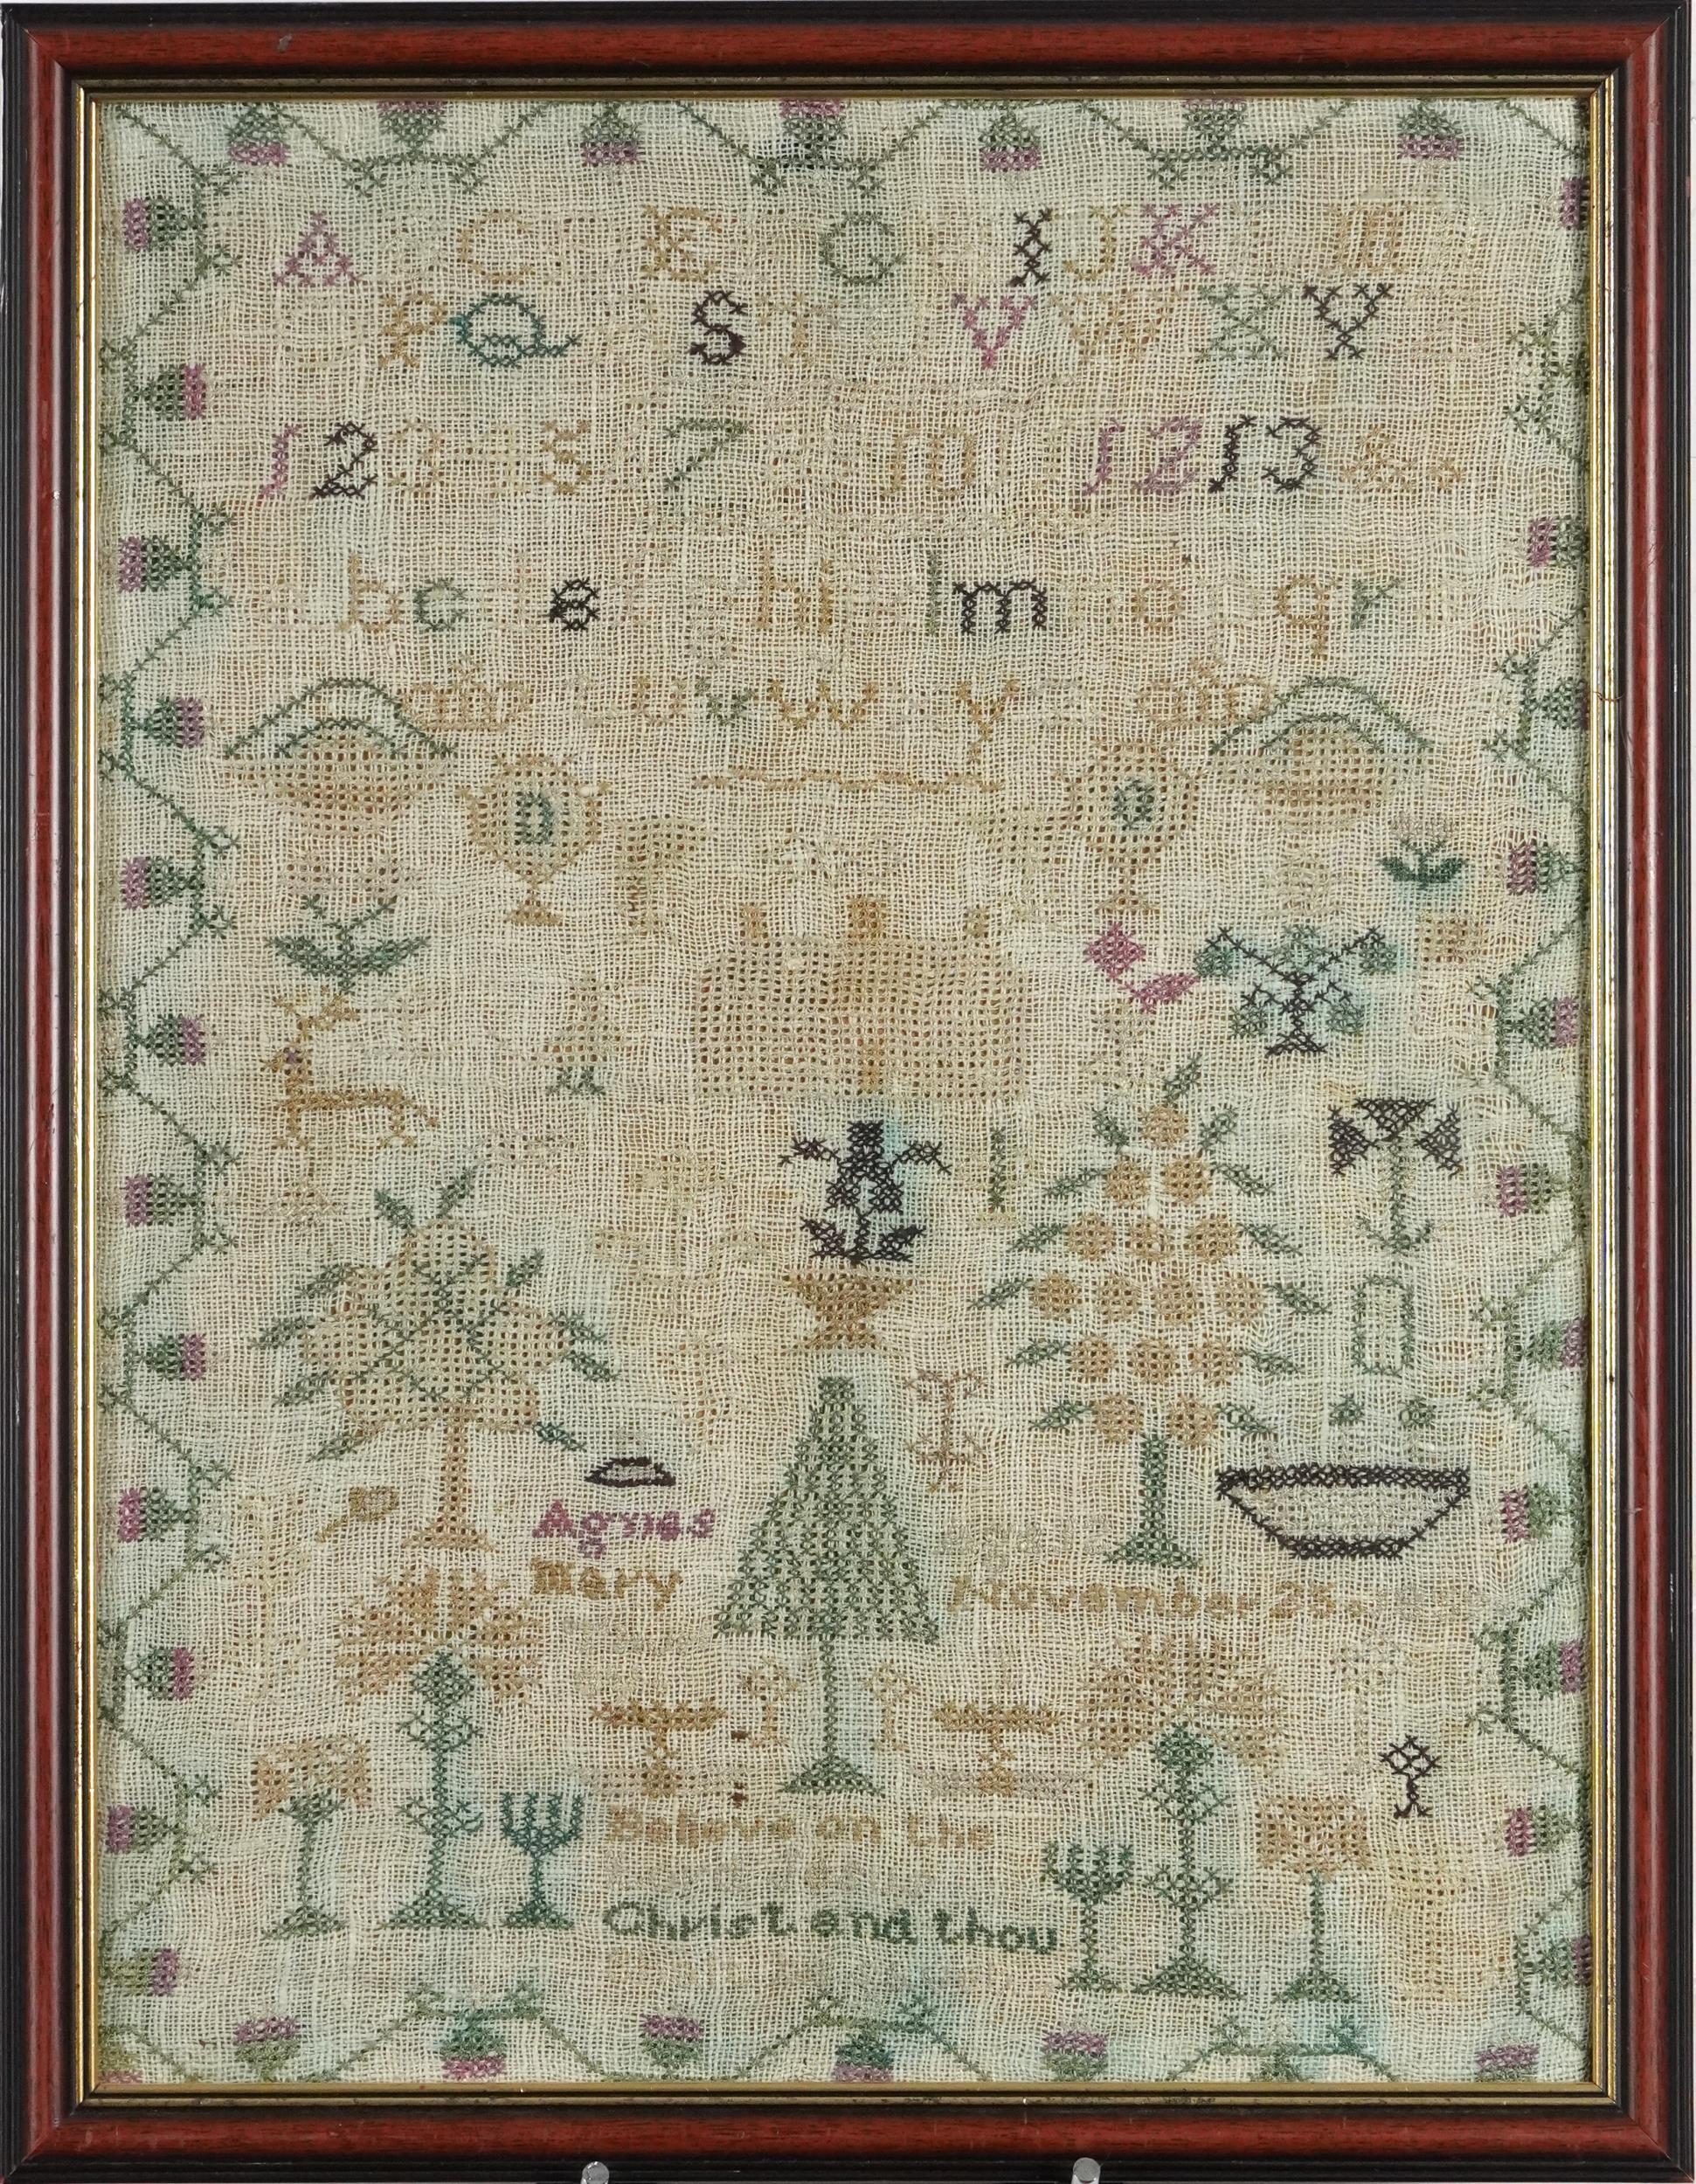 Antique needlework sampler worked by Agnes Mary age 12, framed and glazed, 40cm x 30cm excluding the - Image 2 of 3